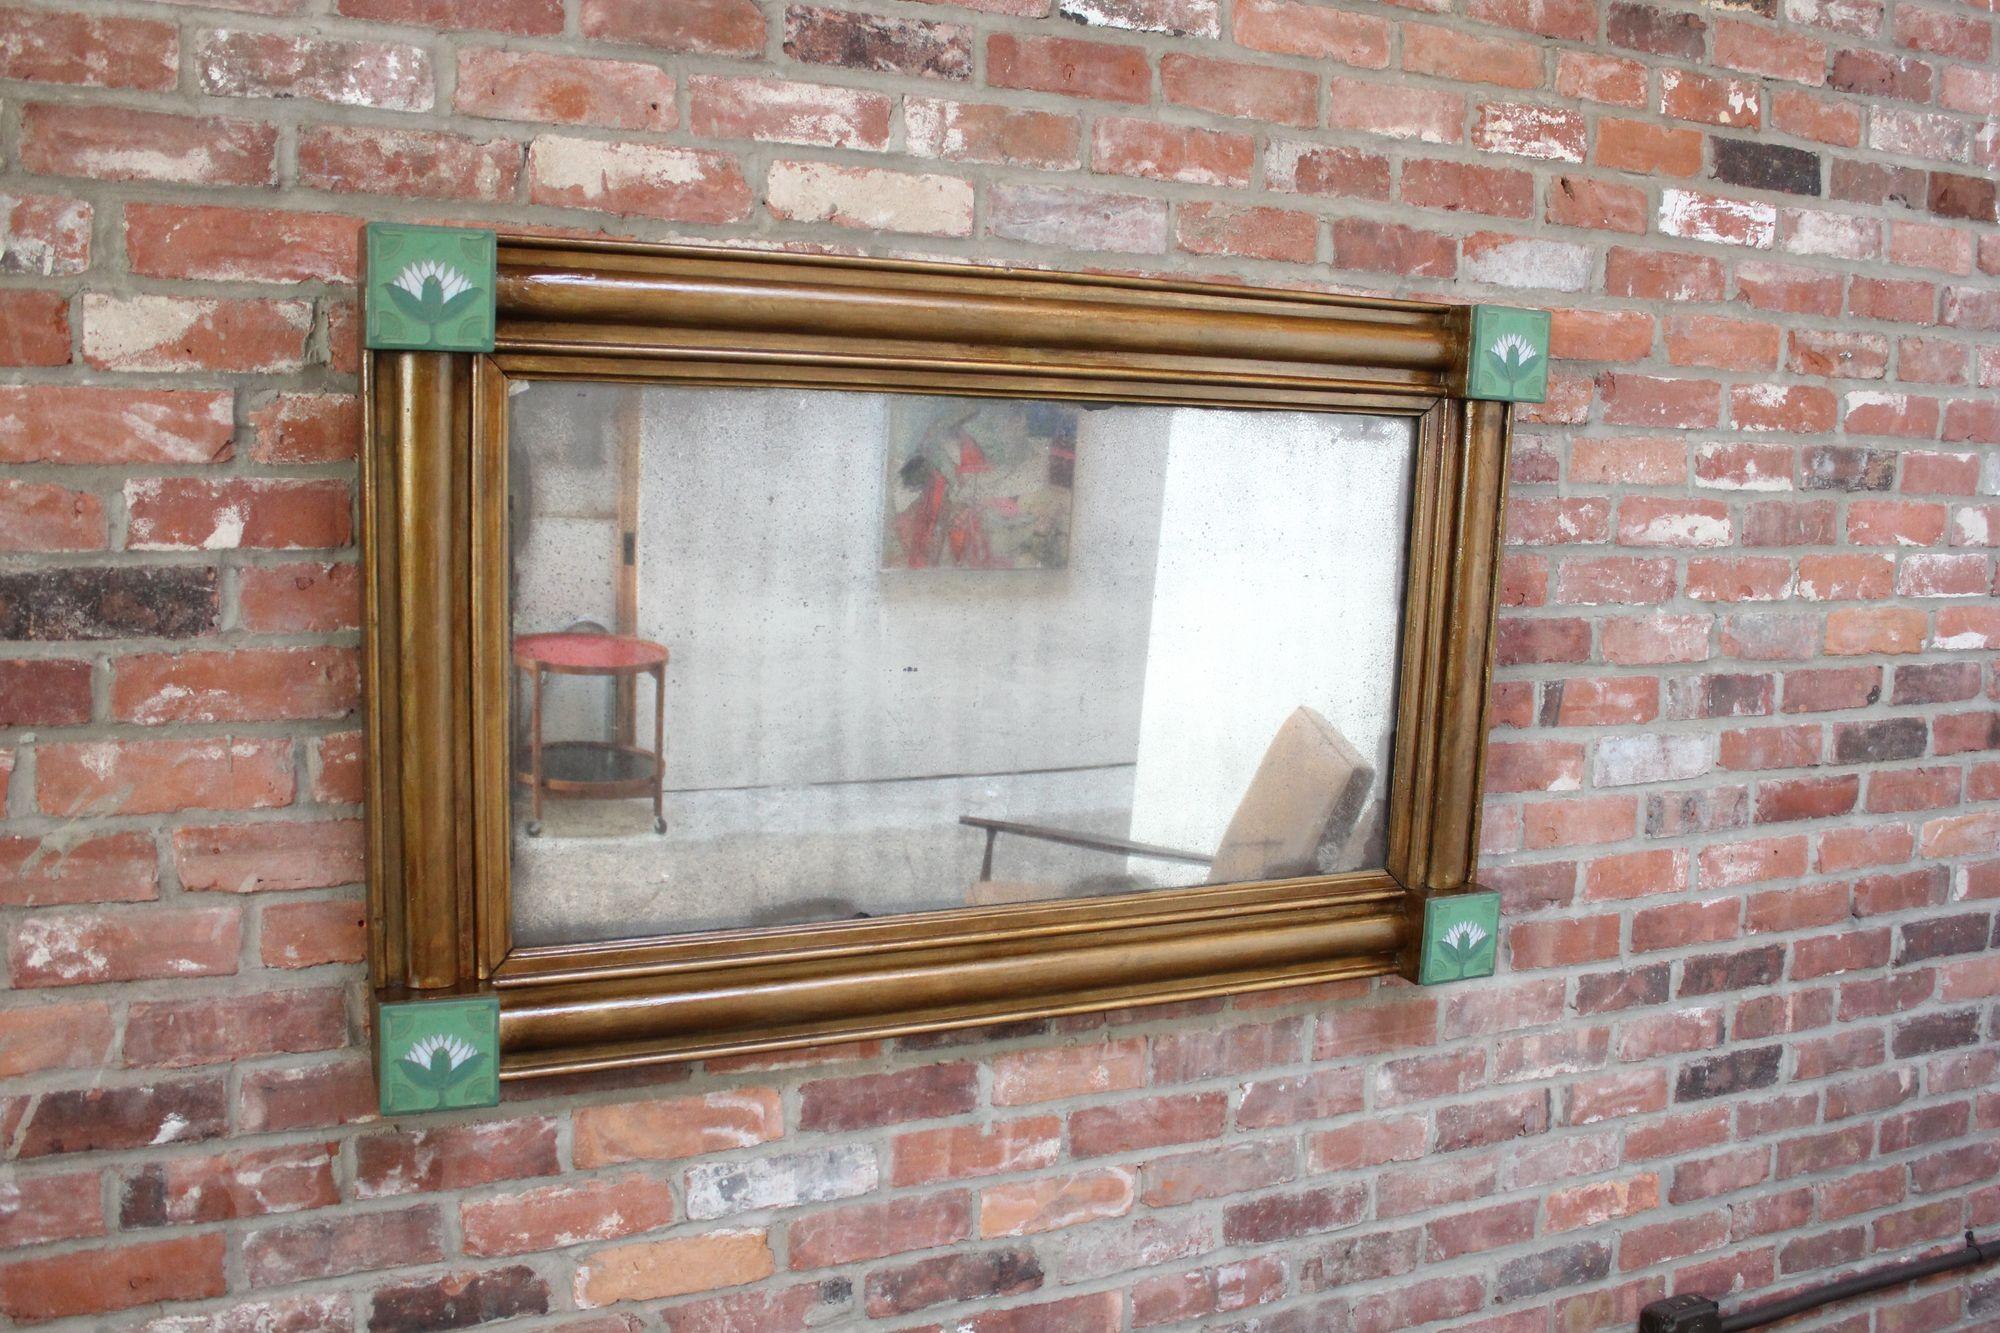 American Empire-Style giltwood mirror adorned in each corner with ceramic tiles depicting lotus flowers (ca. early 1930s, USA).
Glass is in distressed condition with foxing present throughout. Wear to the original gilt, as shown.
Remains an